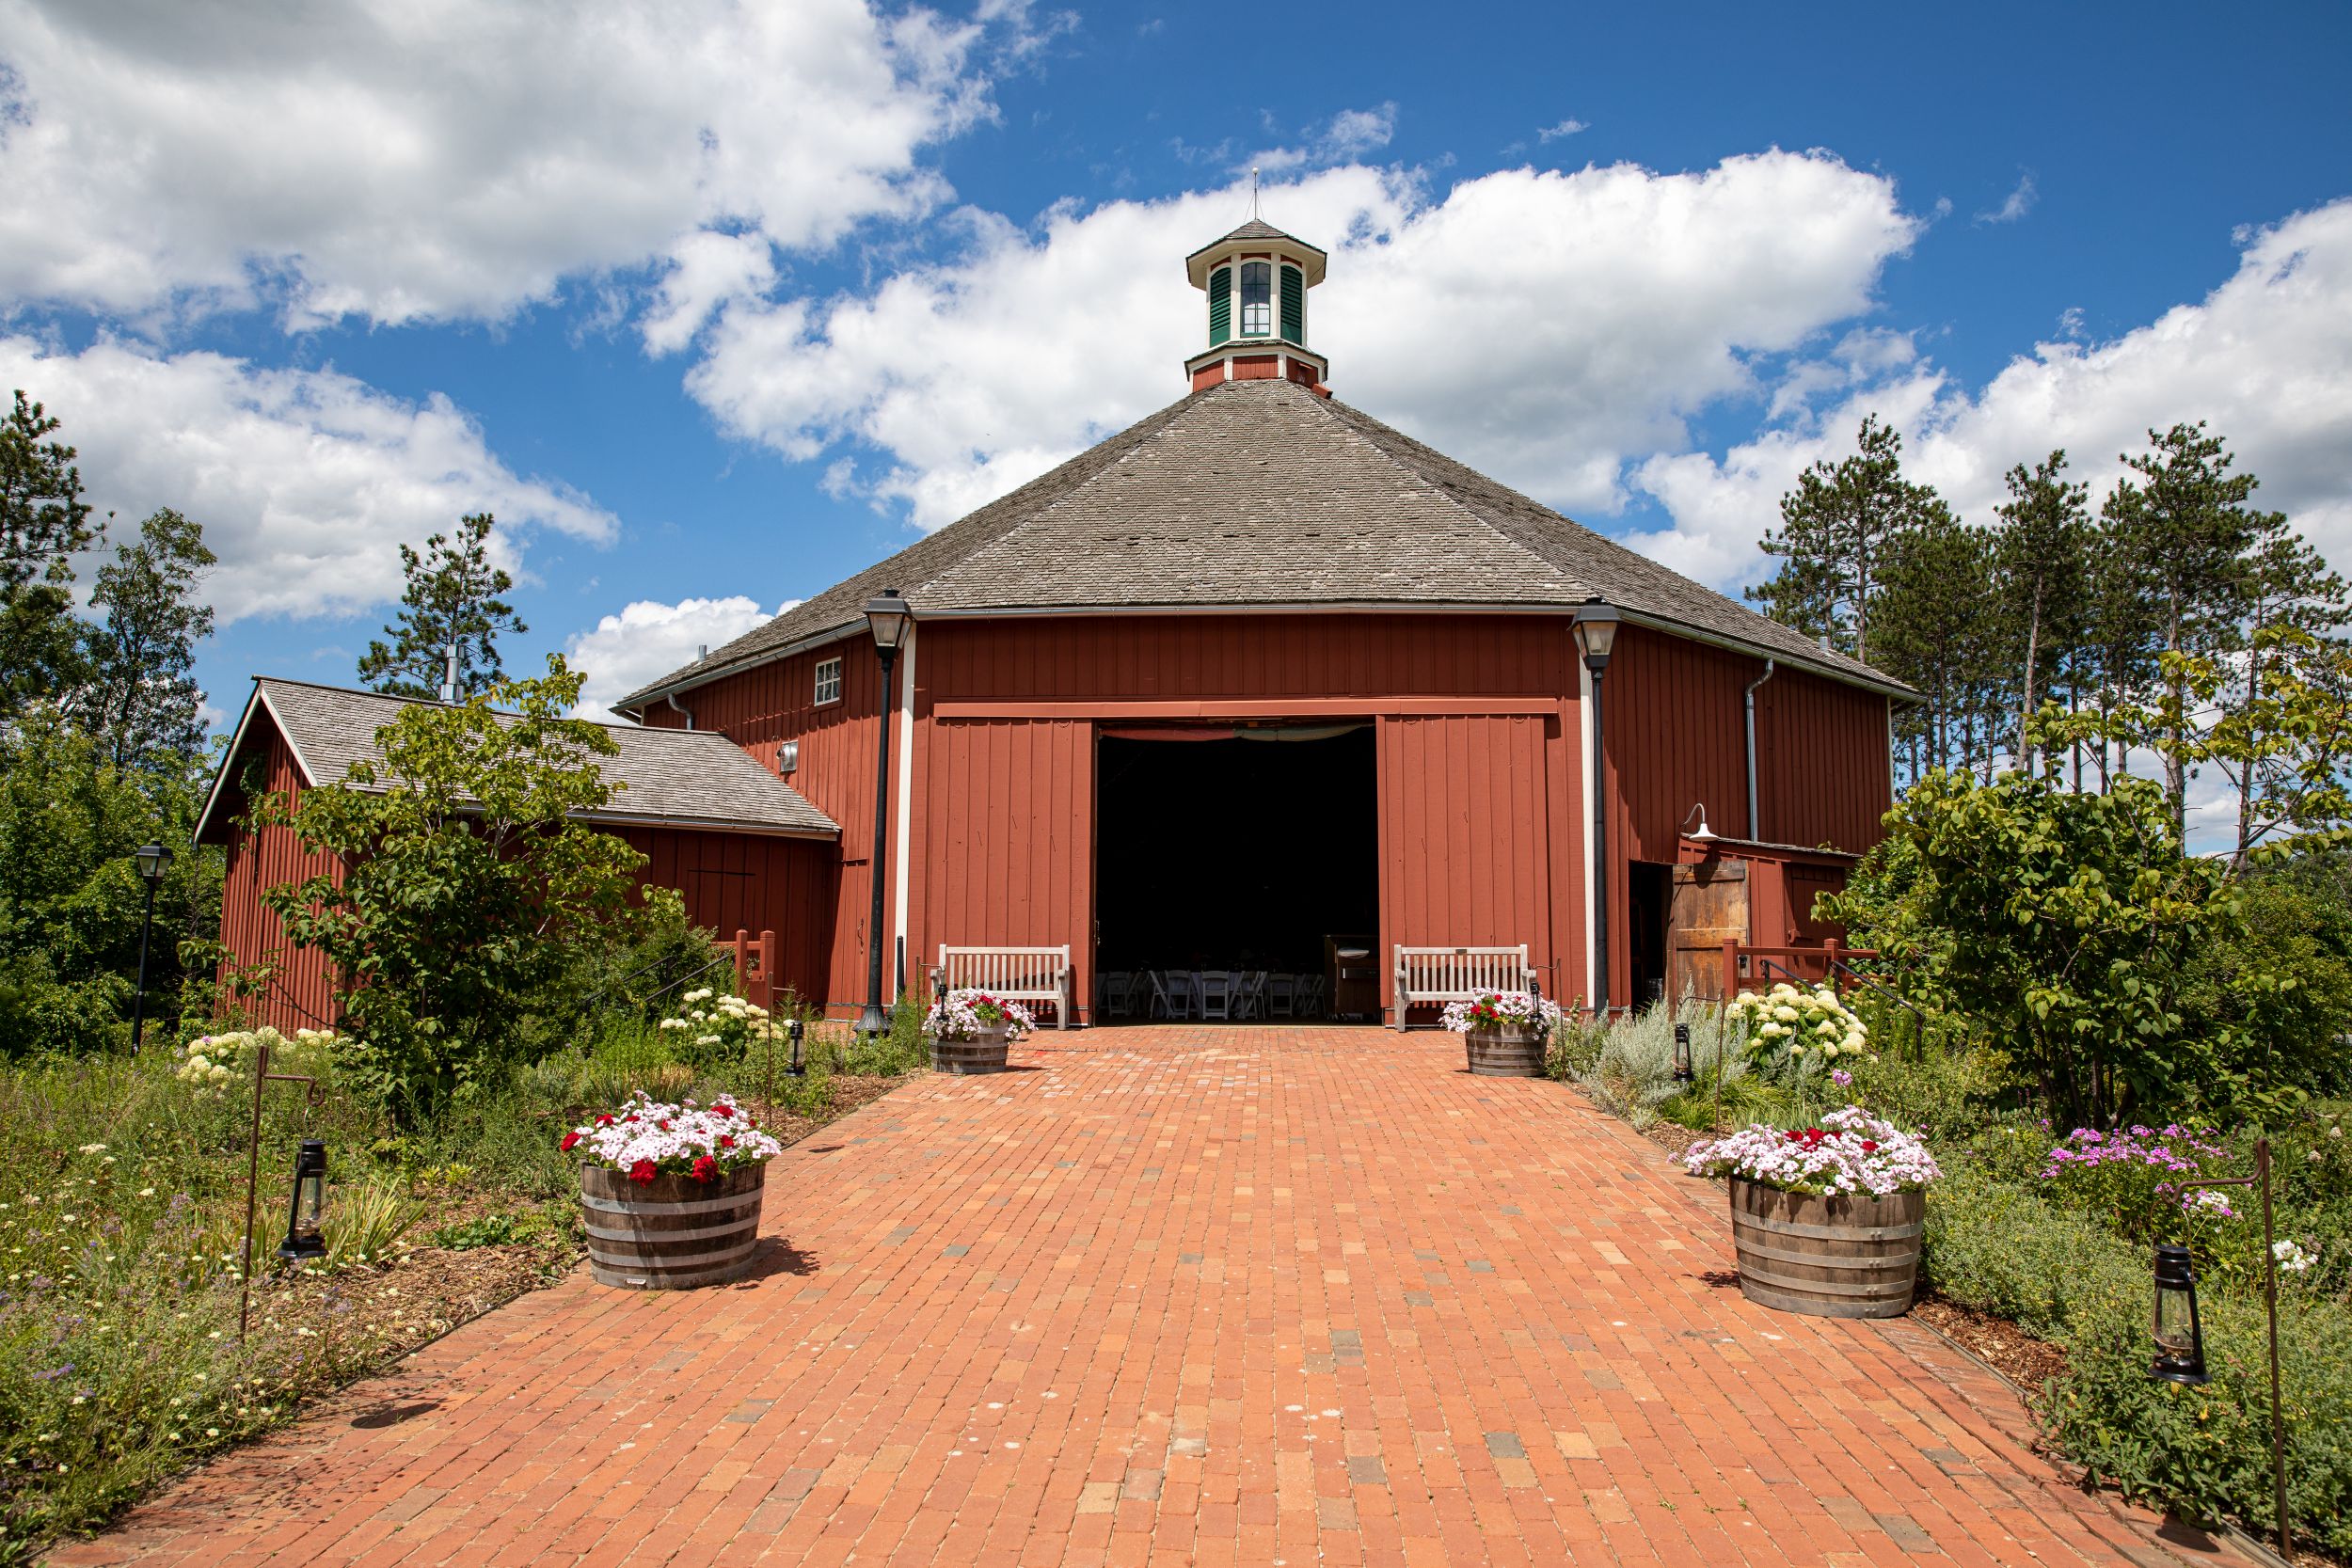 A red barn with the door open and greenery and flowers around it